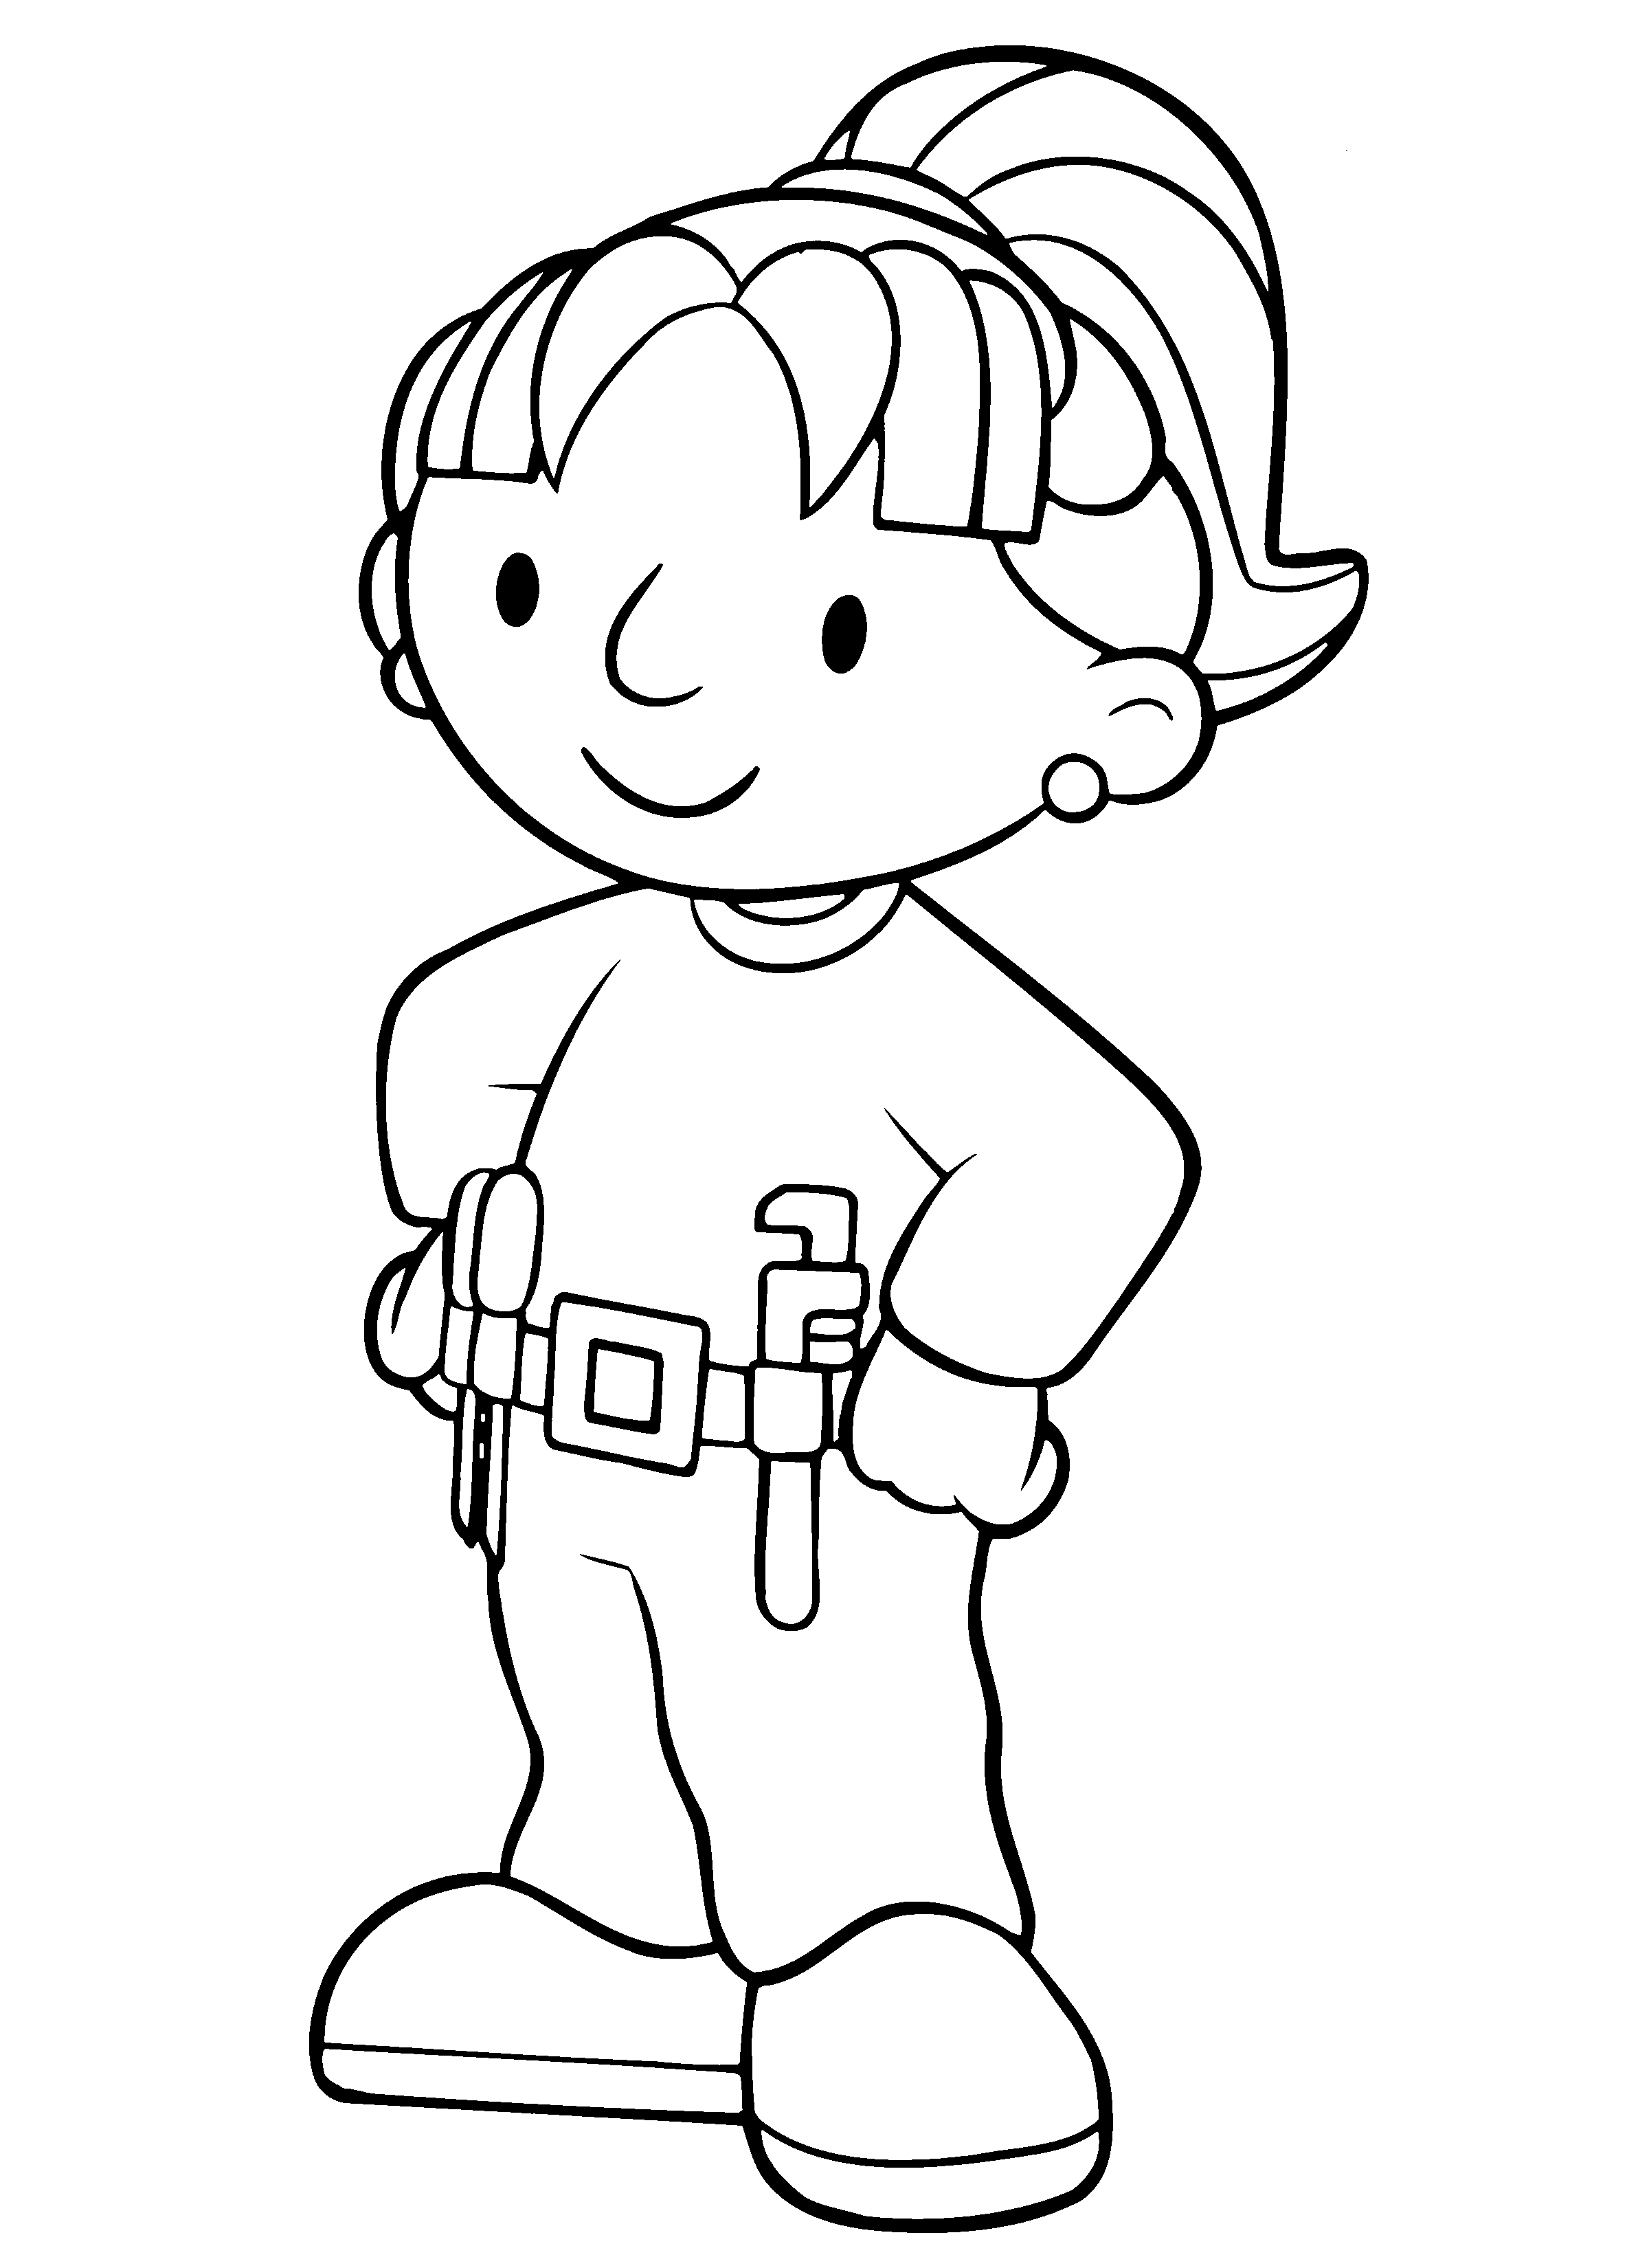 Coloring Page - Bob the builder coloring pages 61